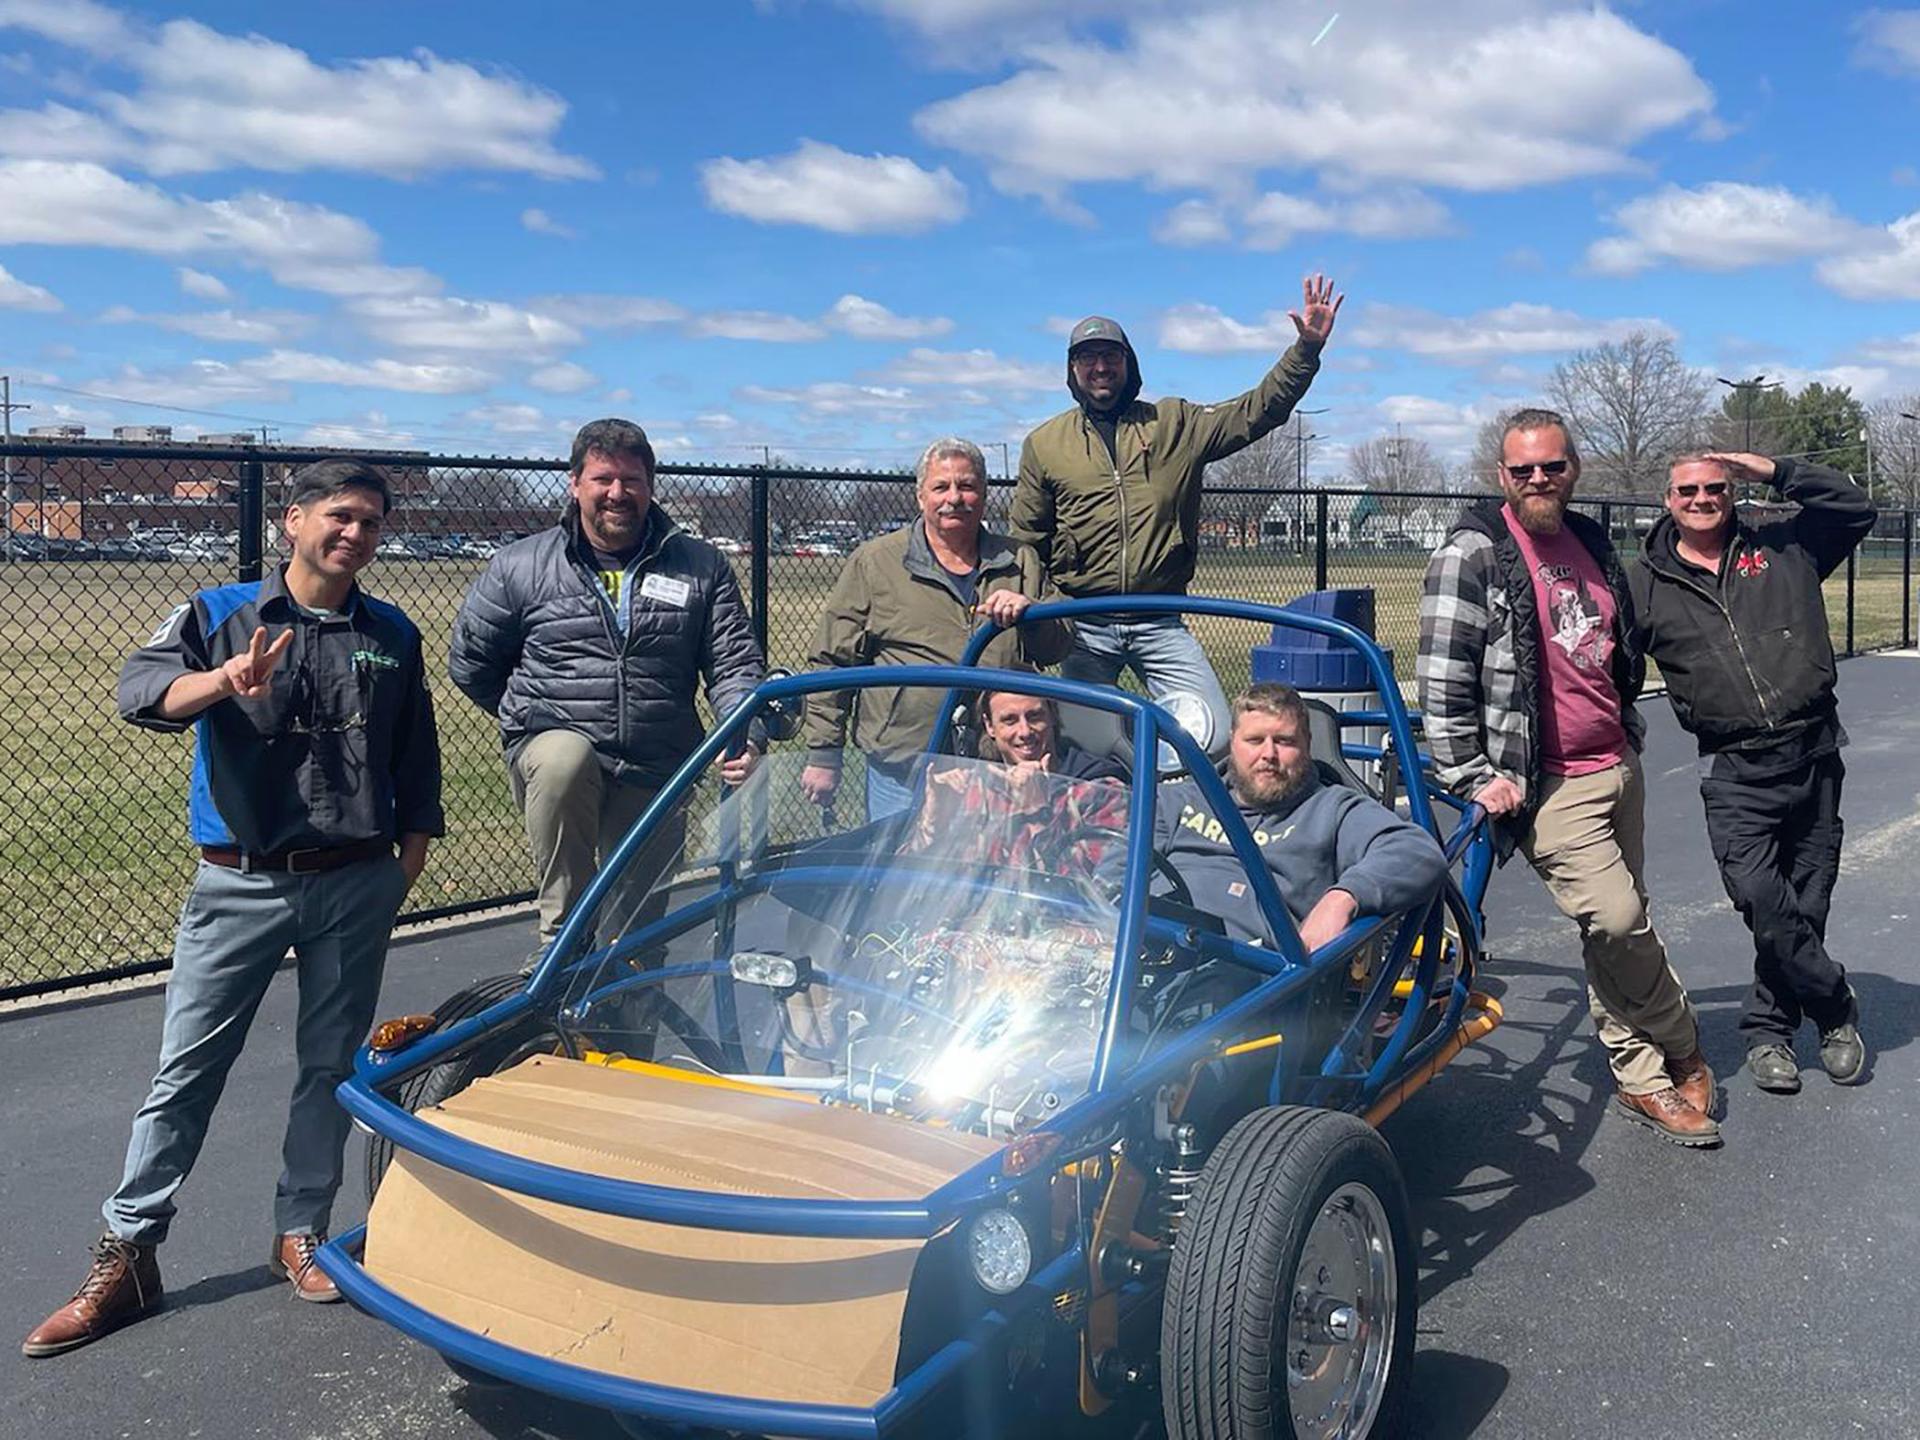 Lyndon Institute automotive instructor Dan Camber (second from left) traveled to Sterling, Illinois to take part in a week-long training program in the spring of 2022. Camber worked with six other teachers to build an electric-powered vehicle from scratch using a kit provided by The Switch Lab.